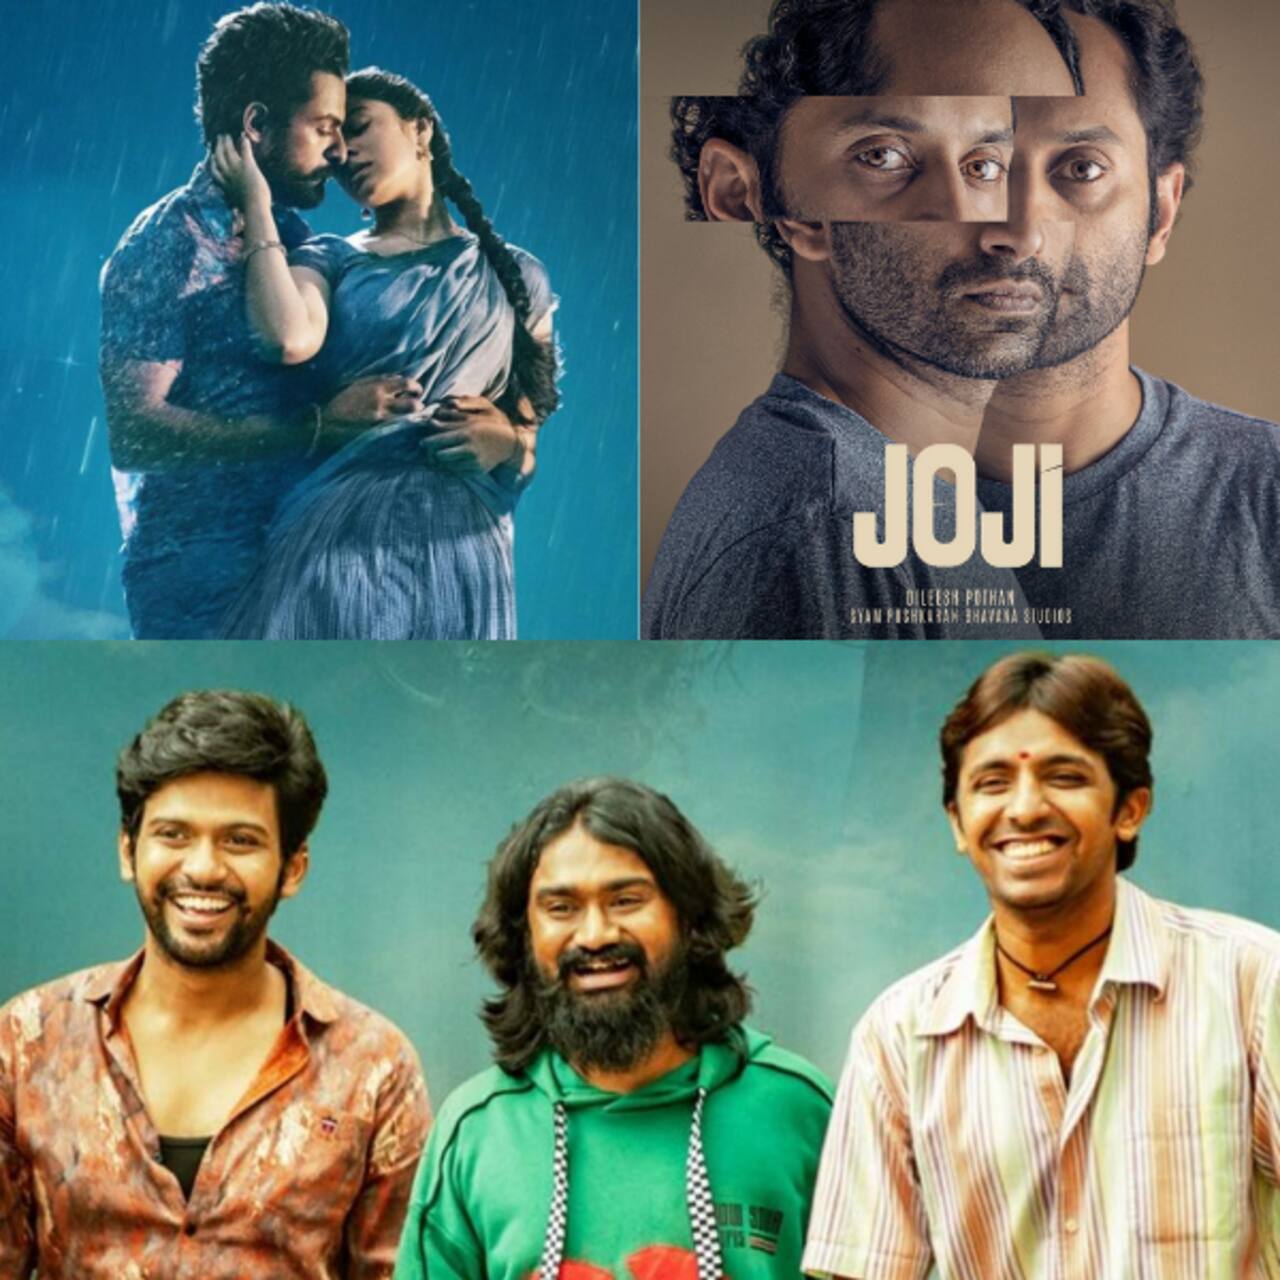 Uppena, The Priest, Jathi Ratnalu – 11 new South films on Netflix, Hotstar VIP, Amazon Prime Video, and more to include in your binge-list